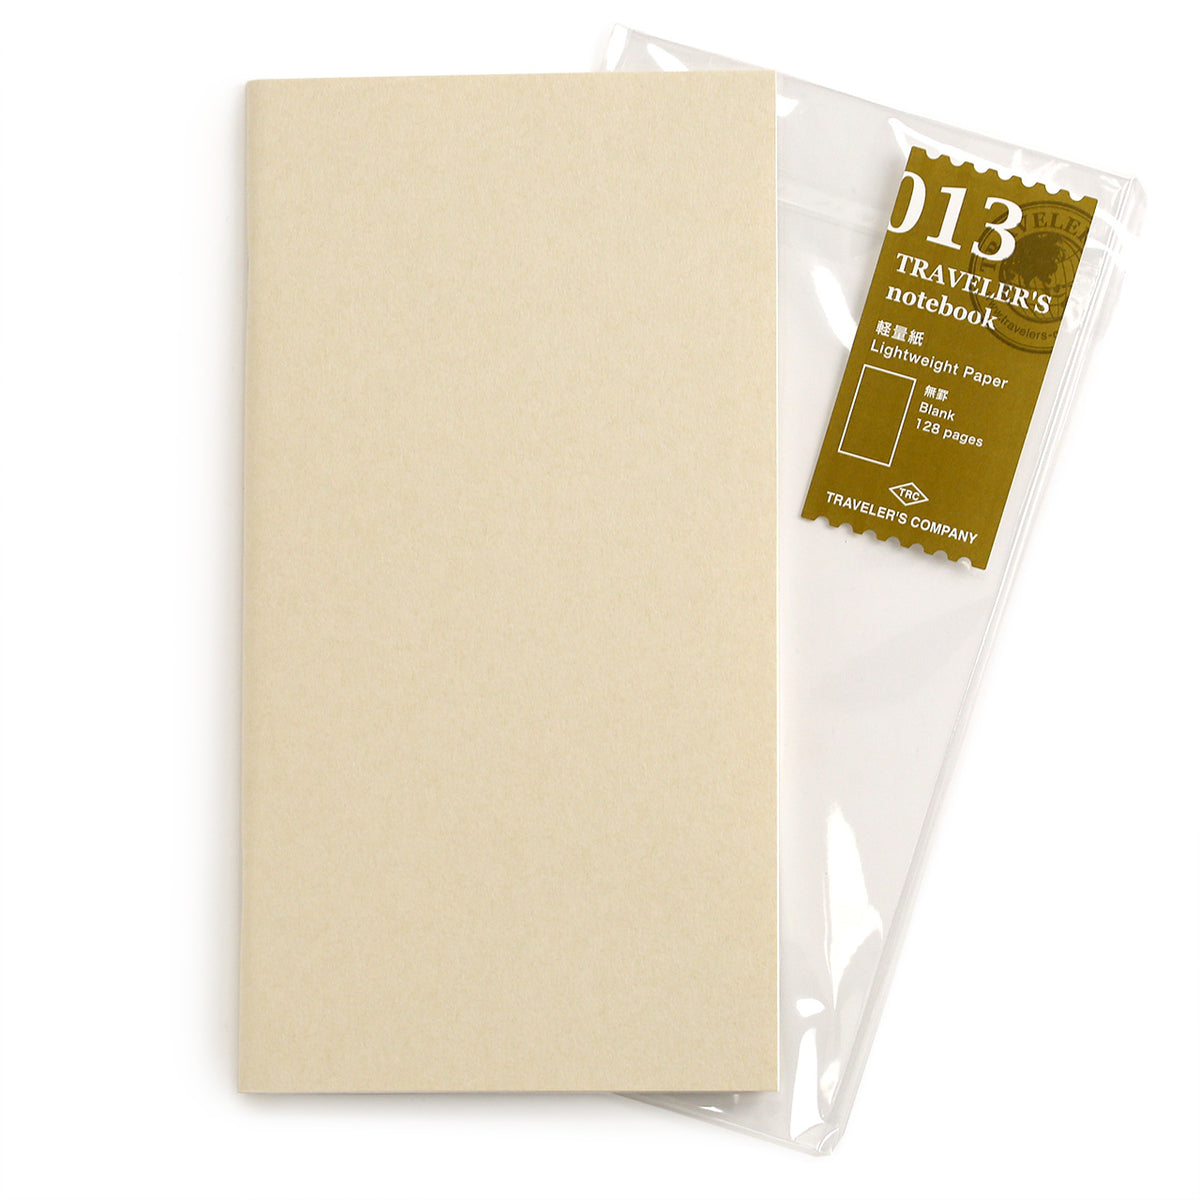 013 lightweight paper refill for regular traveler&#39;s notebook, showing the oatmeal coloured cover and olive green 013 label